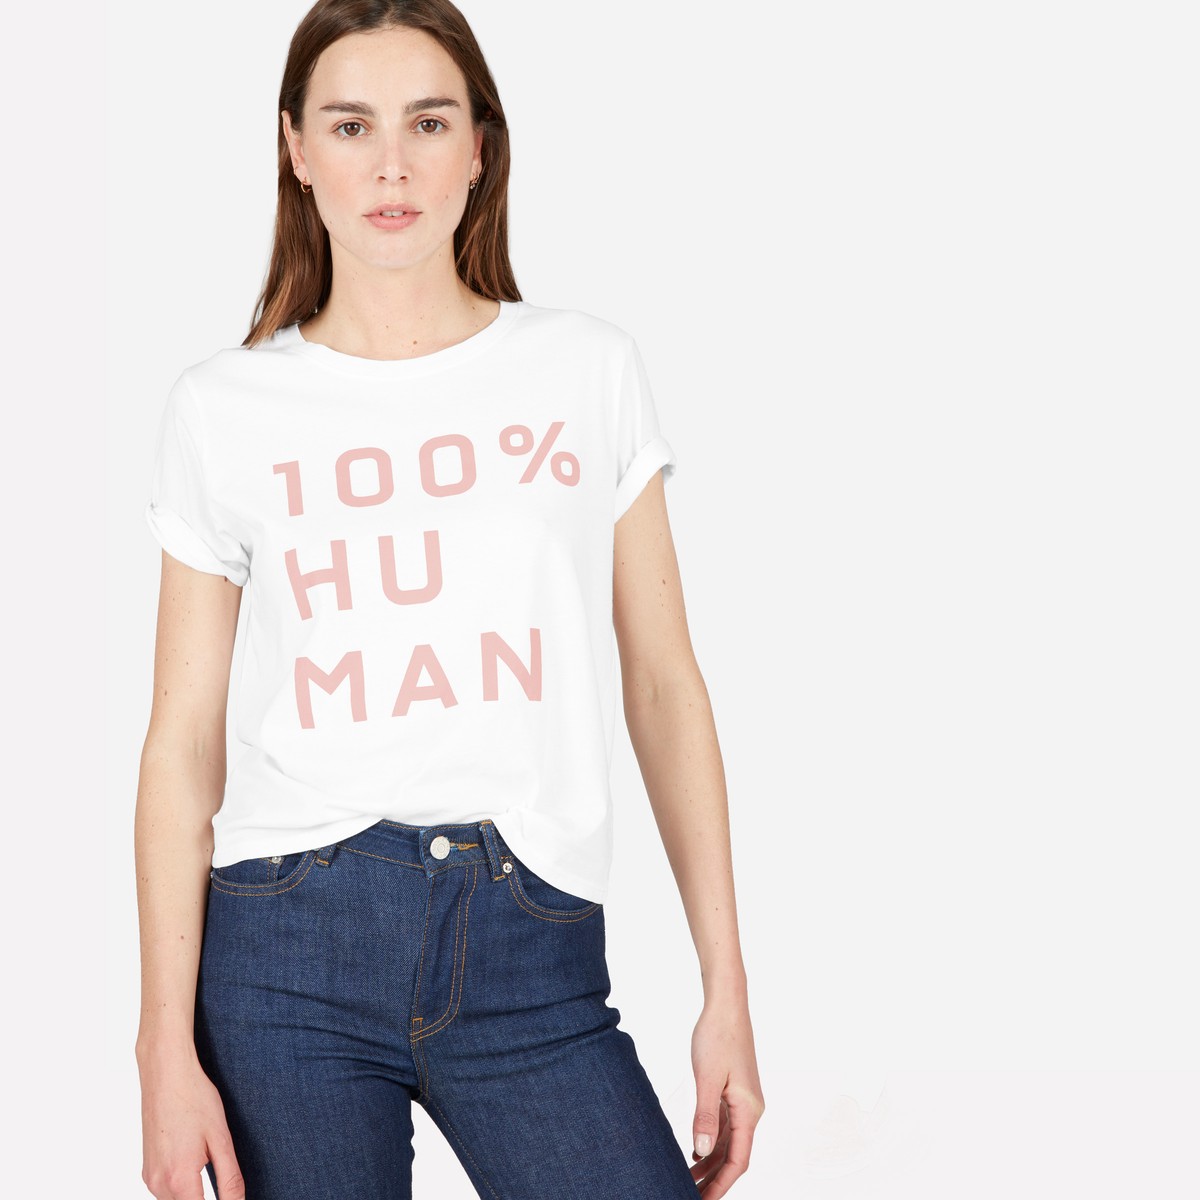 International Women's Day | Something Good, everlane, 100% human, women's rights are human's rights